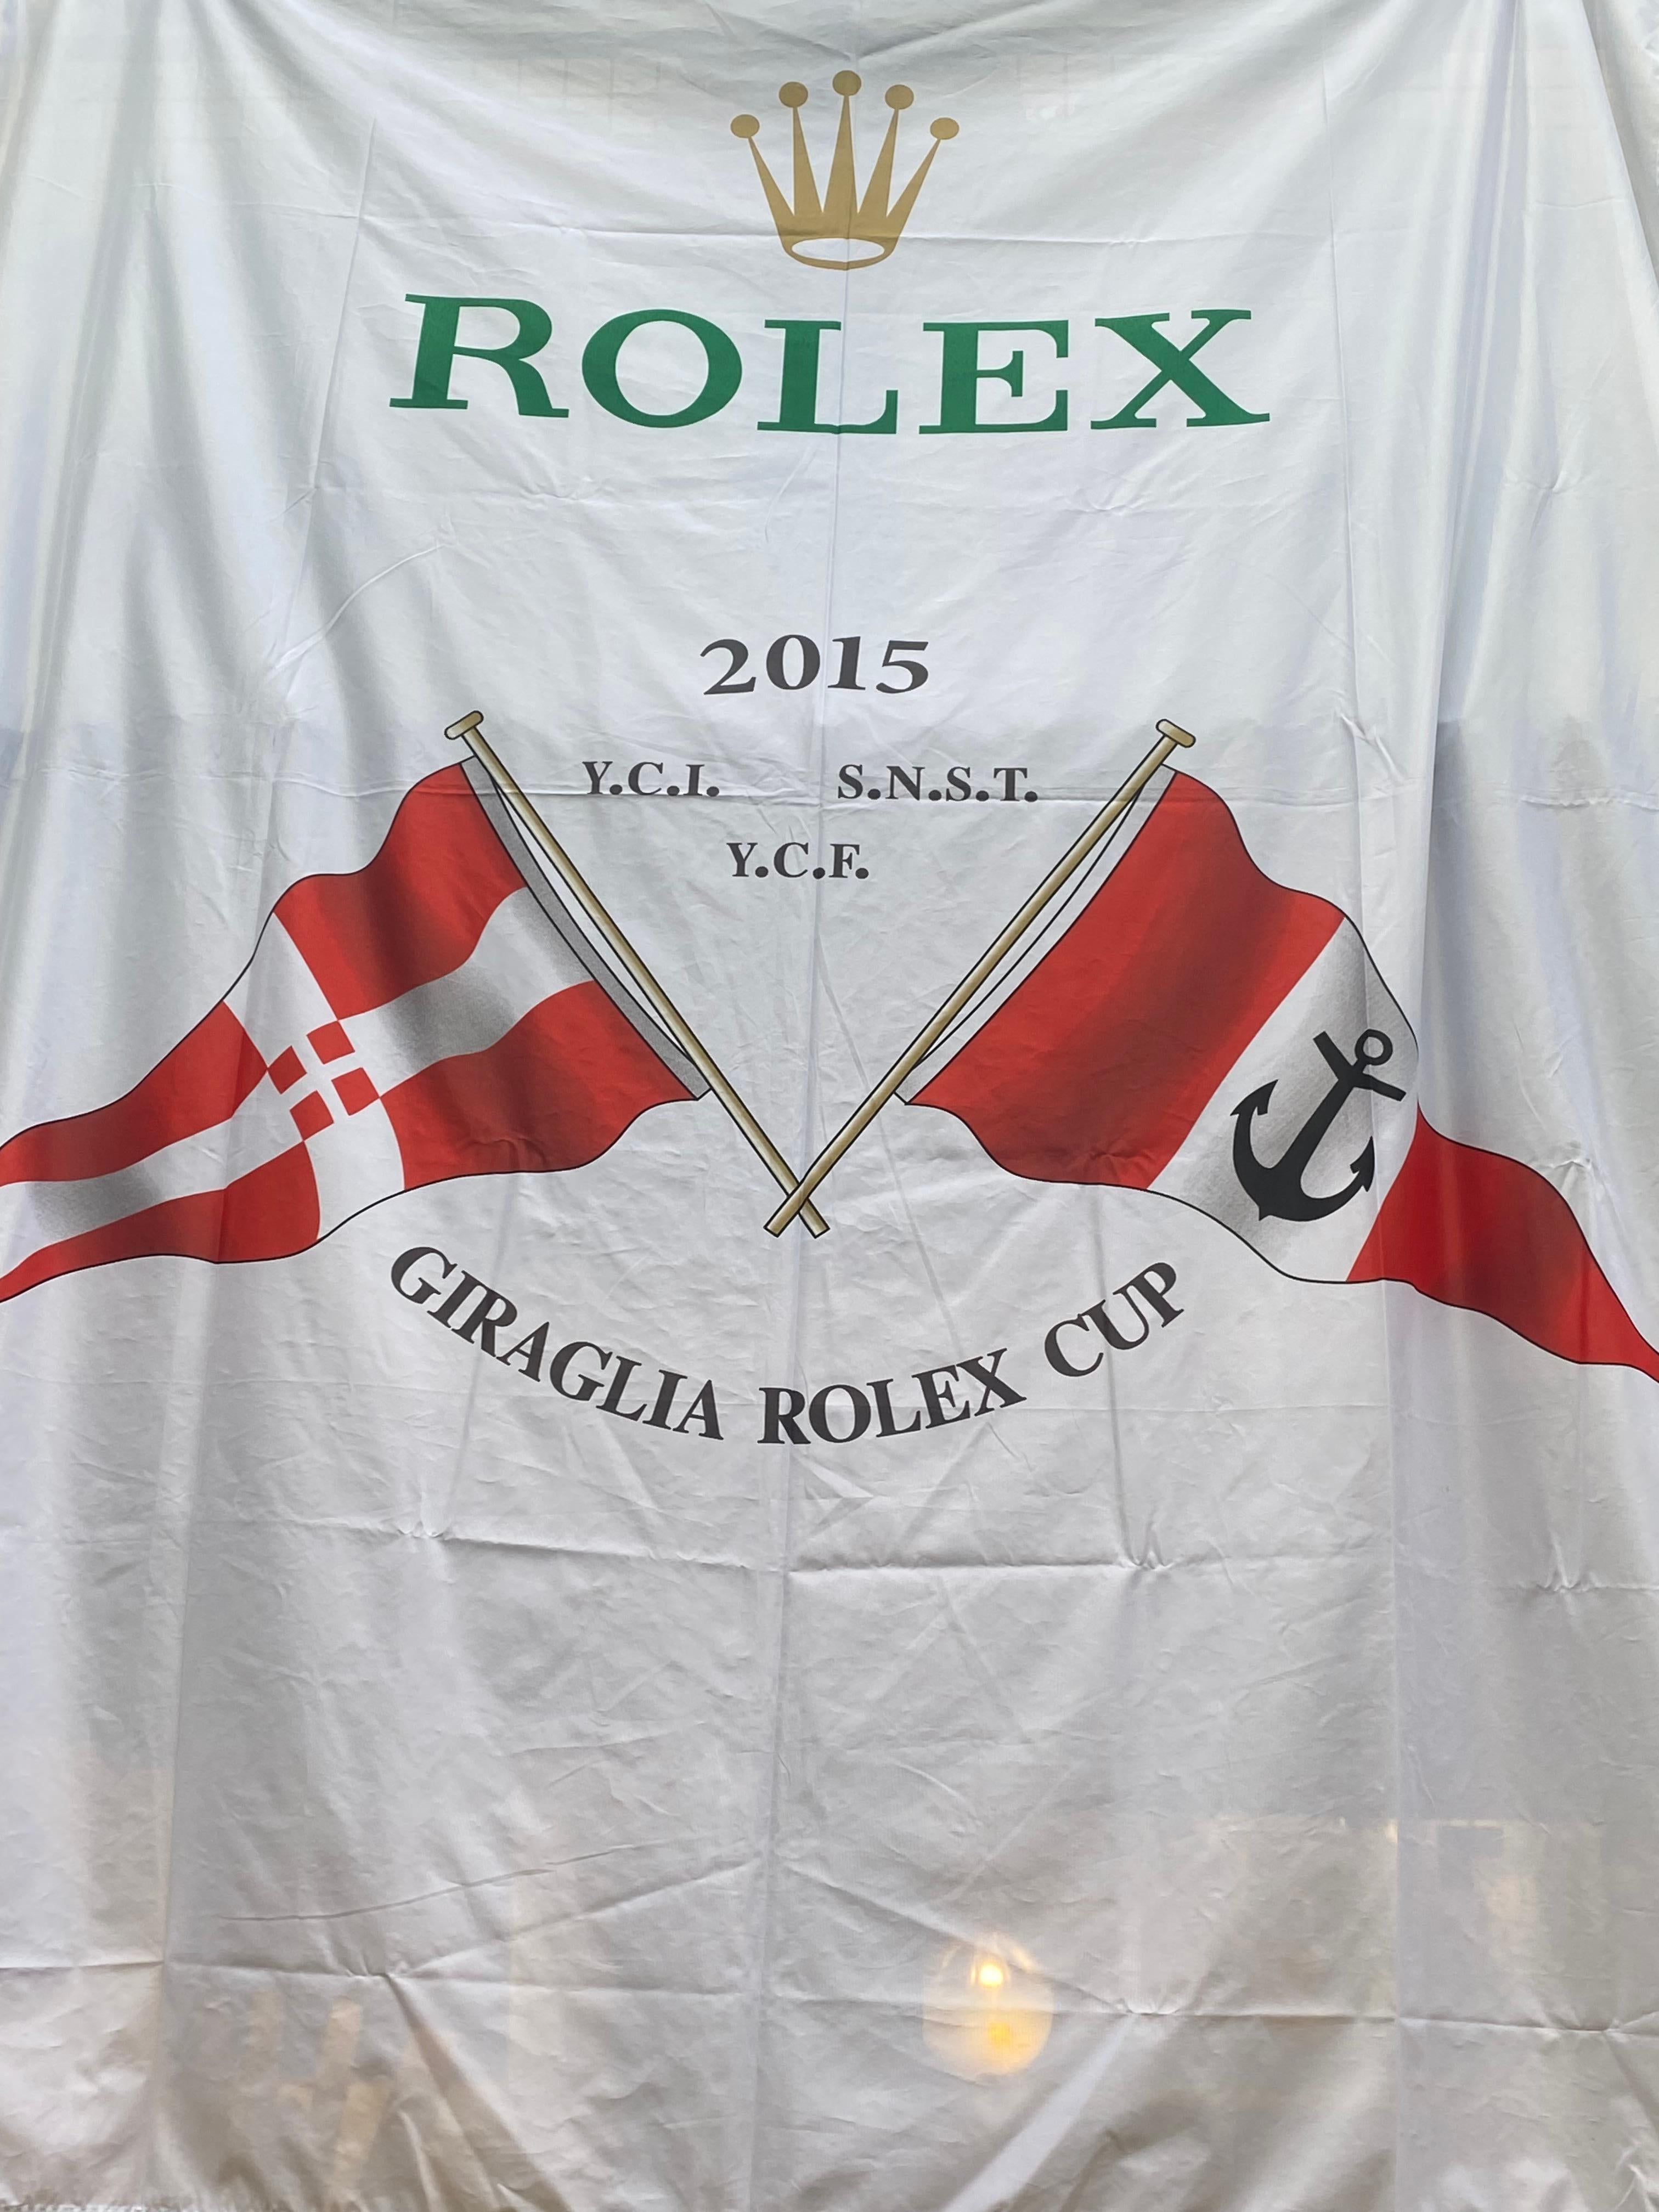 Rolex Large nylon flag For the Rolex Cup Giraglia 2015 In Good Condition For Sale In Saint ouen, FR